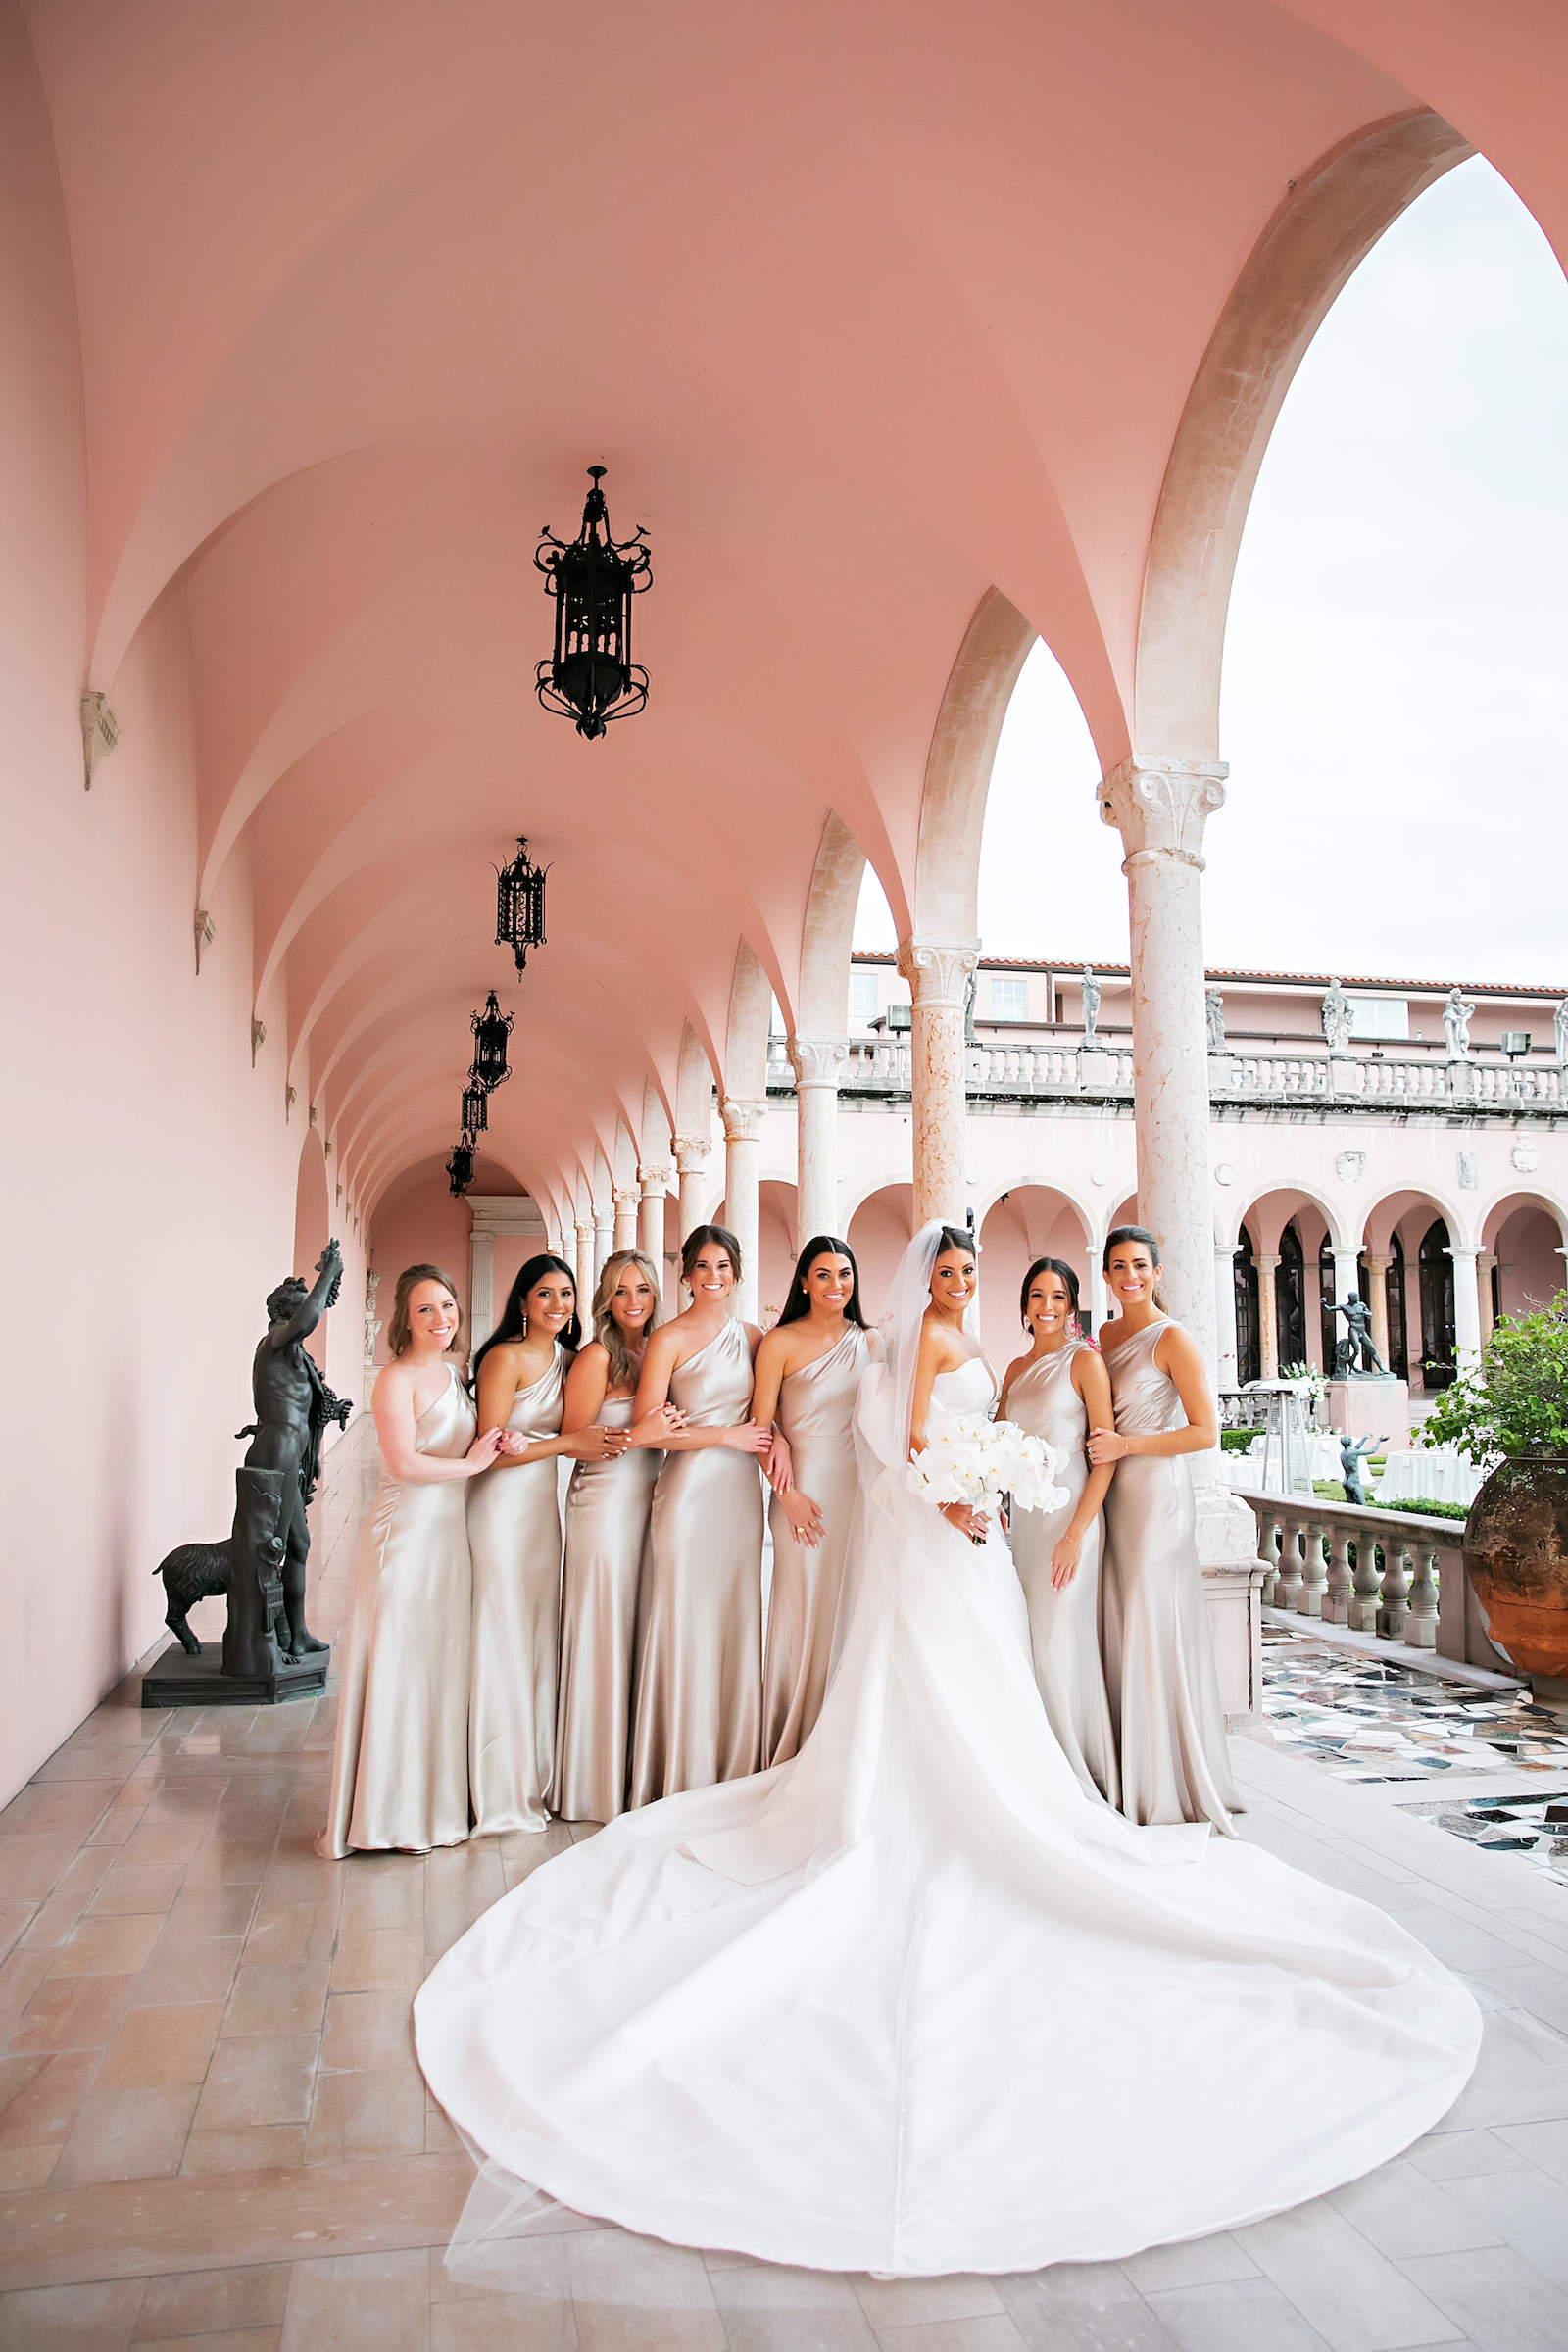 Luxurious Modern Chic Bride and Bridesmaids in Matching Champagne Dresses | Tampa Bay Wedding Photographer Limelight Photography | Sarasota Wedding Venue Ringling Museum